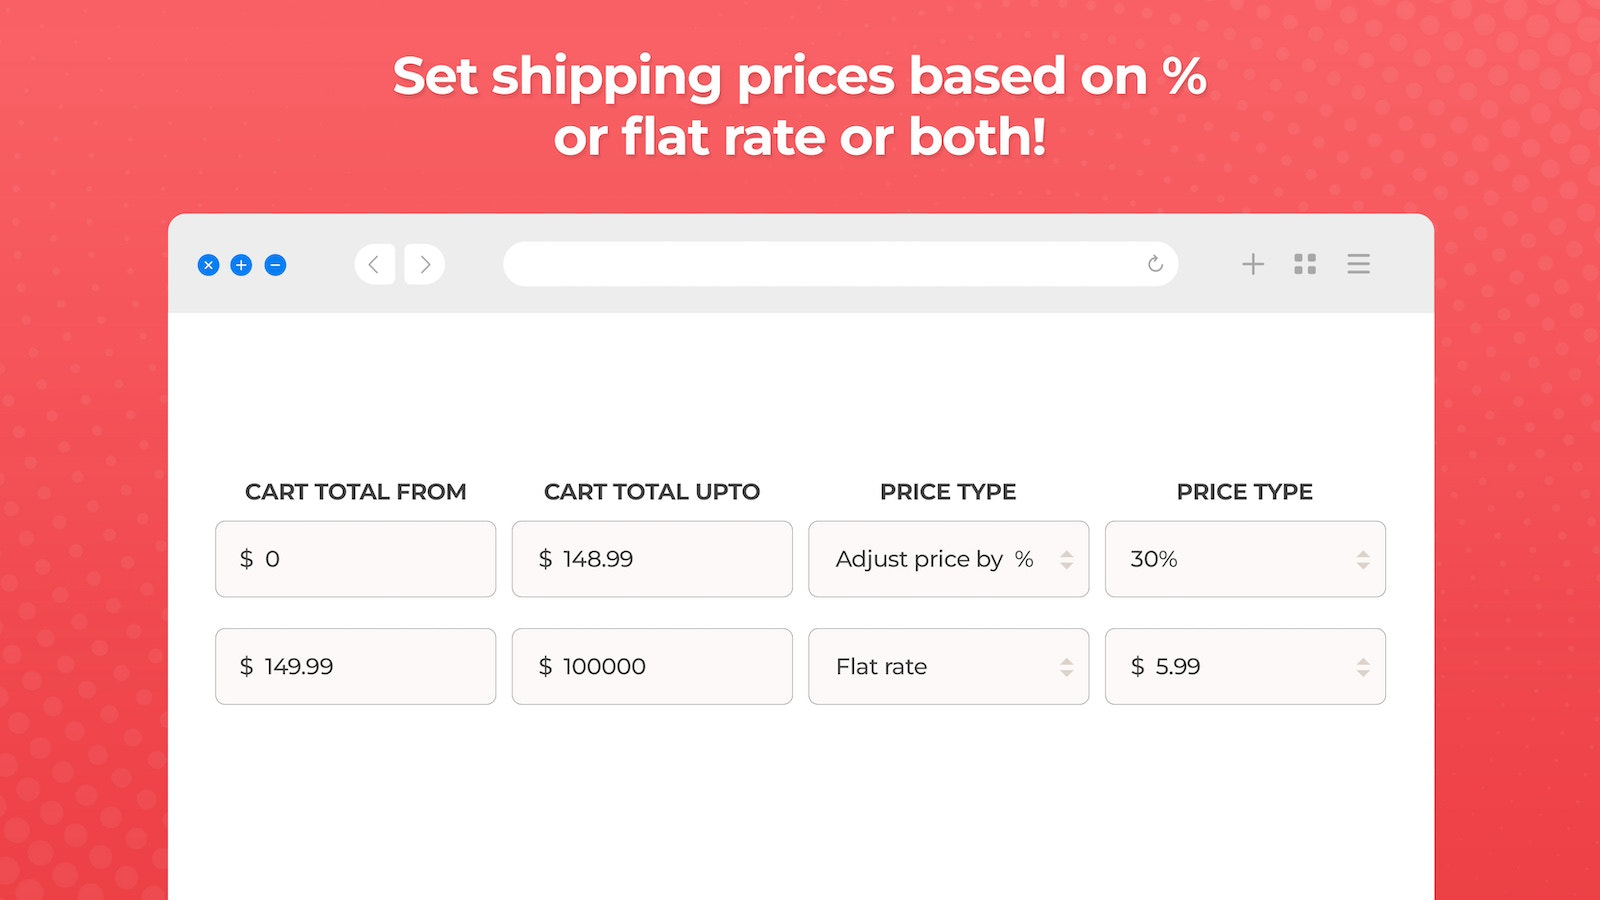 Set shipping prices based on % or flat rate or both!